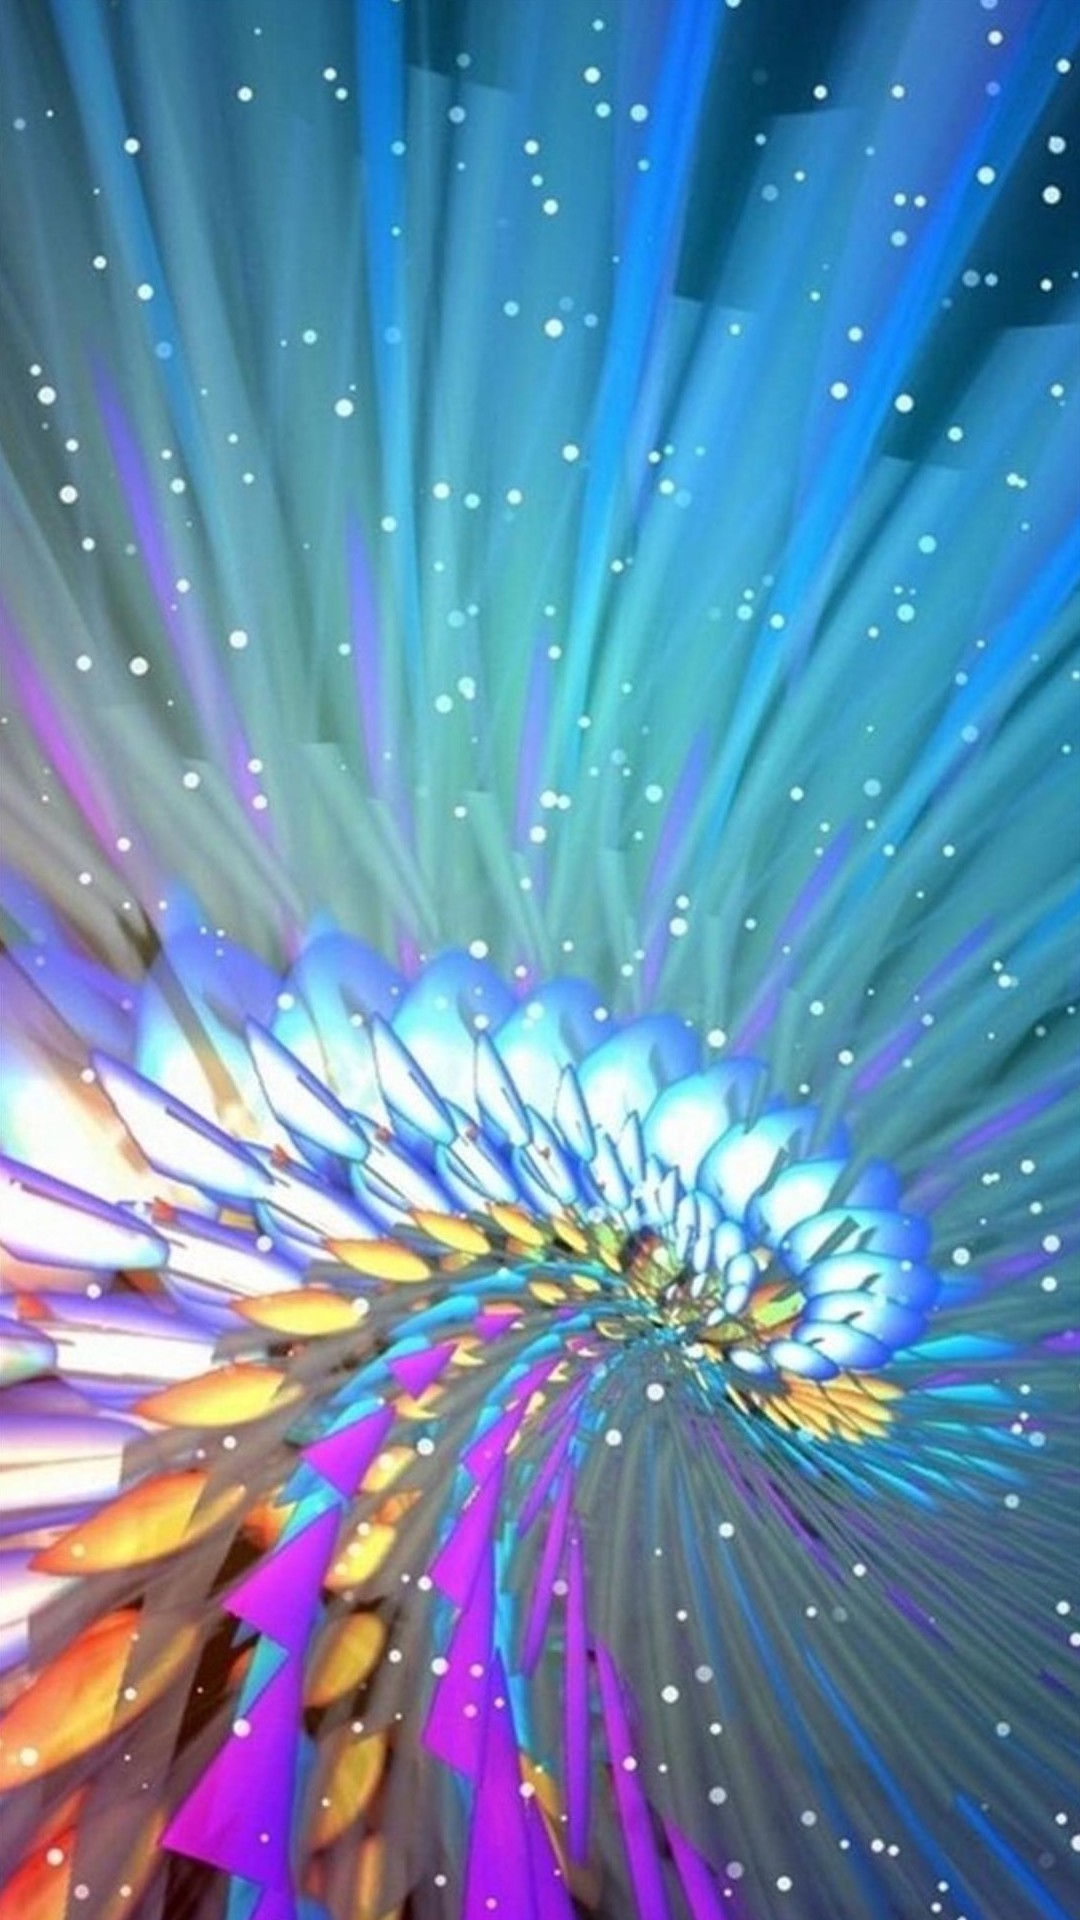 These Samsung Galaxy Note Wallpaper